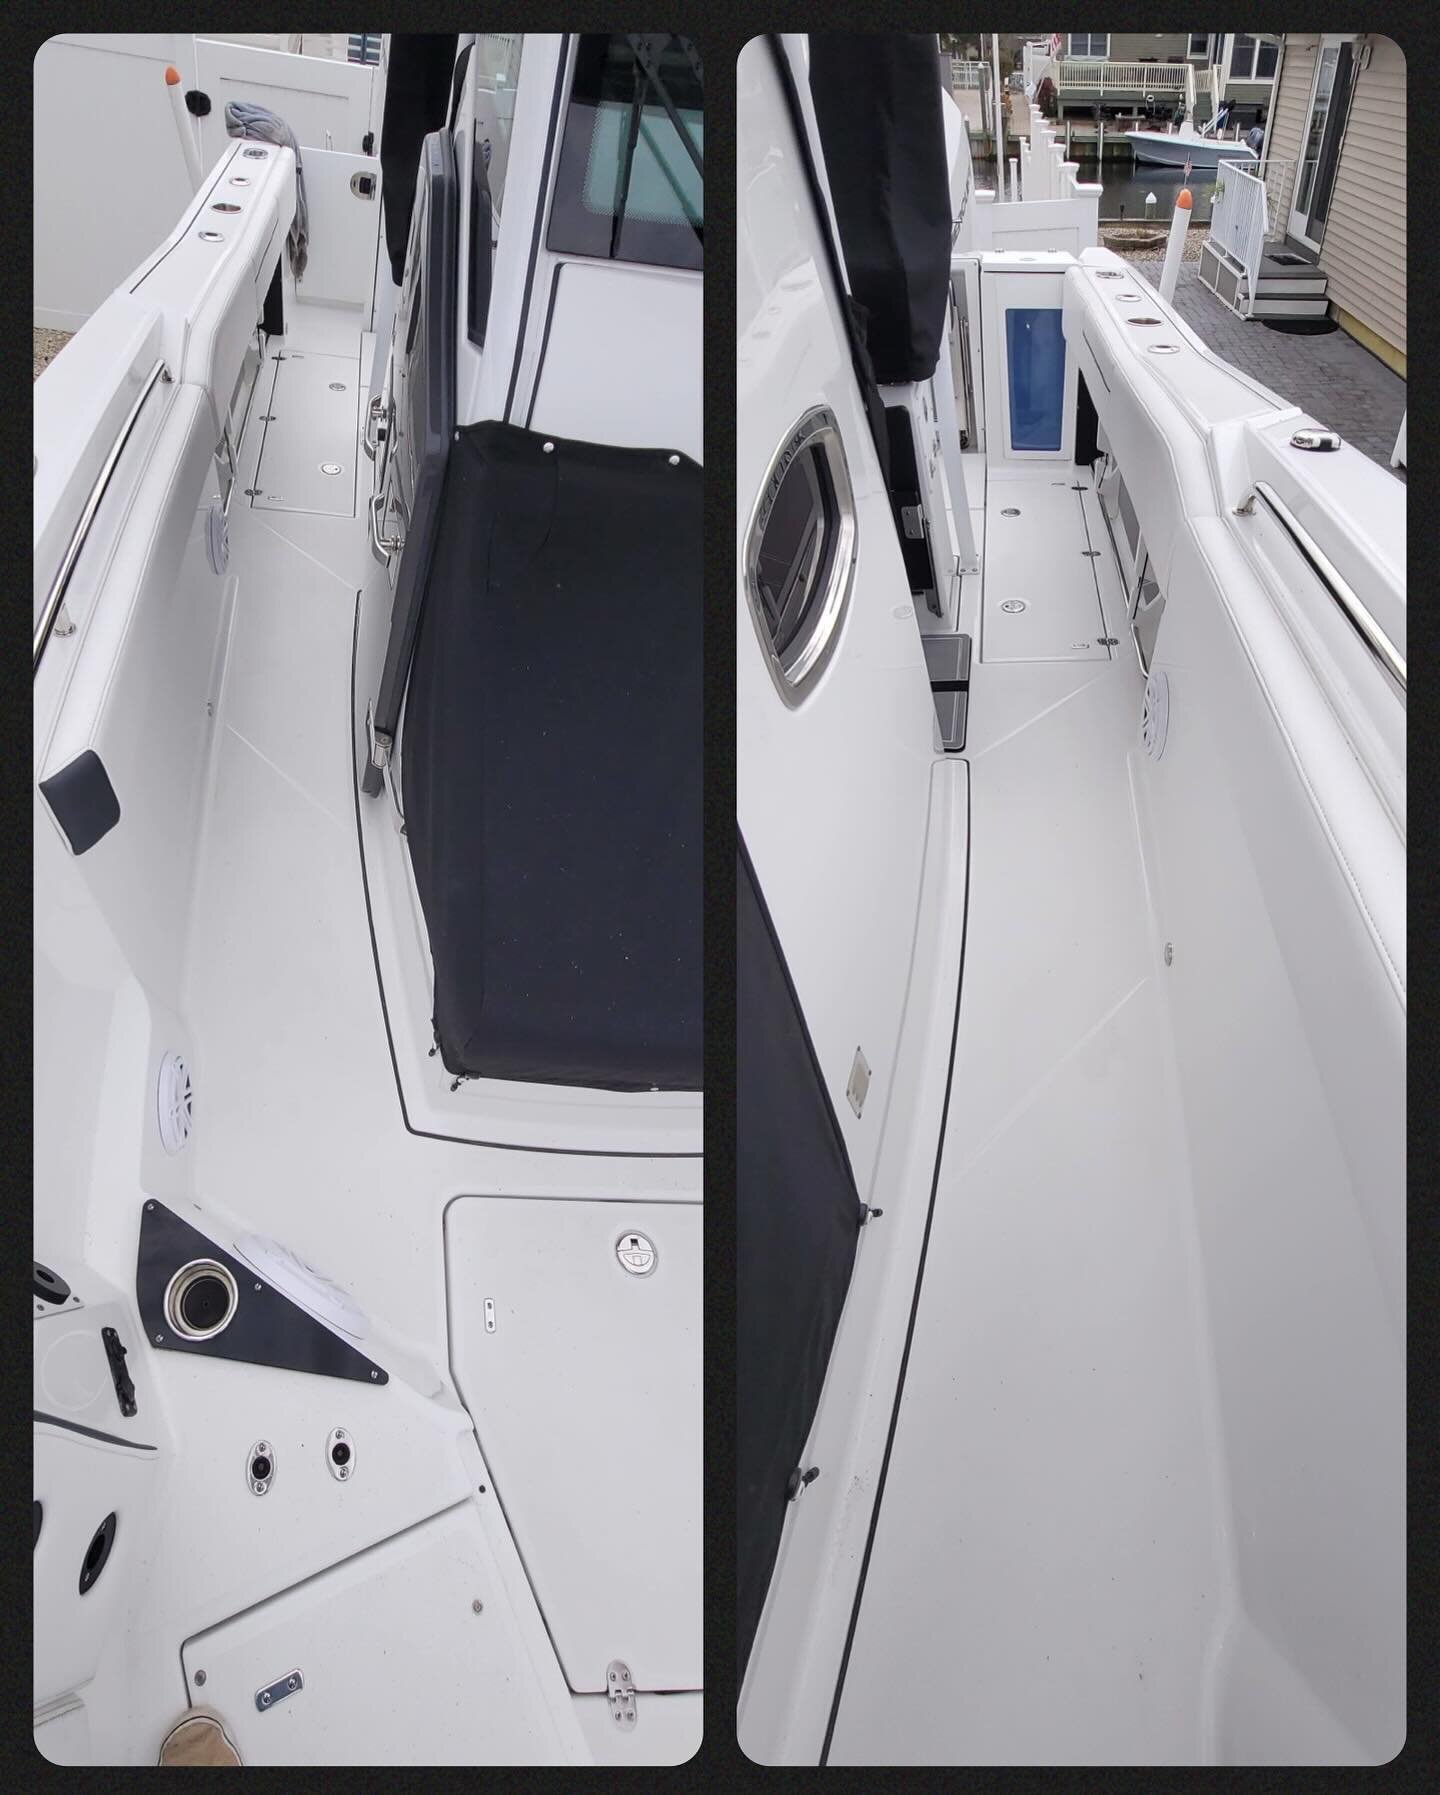 Blackfin 272CC
9mm Silver cloud over pearl over black w/the Cascade pattern.
Side by side before &amp; some side by side before &amp; afters! 
Beautiful day today in Forked River 
@gatorstepit @gatorstepfs #gatorstep #elitemarineproducts #boatfloorin